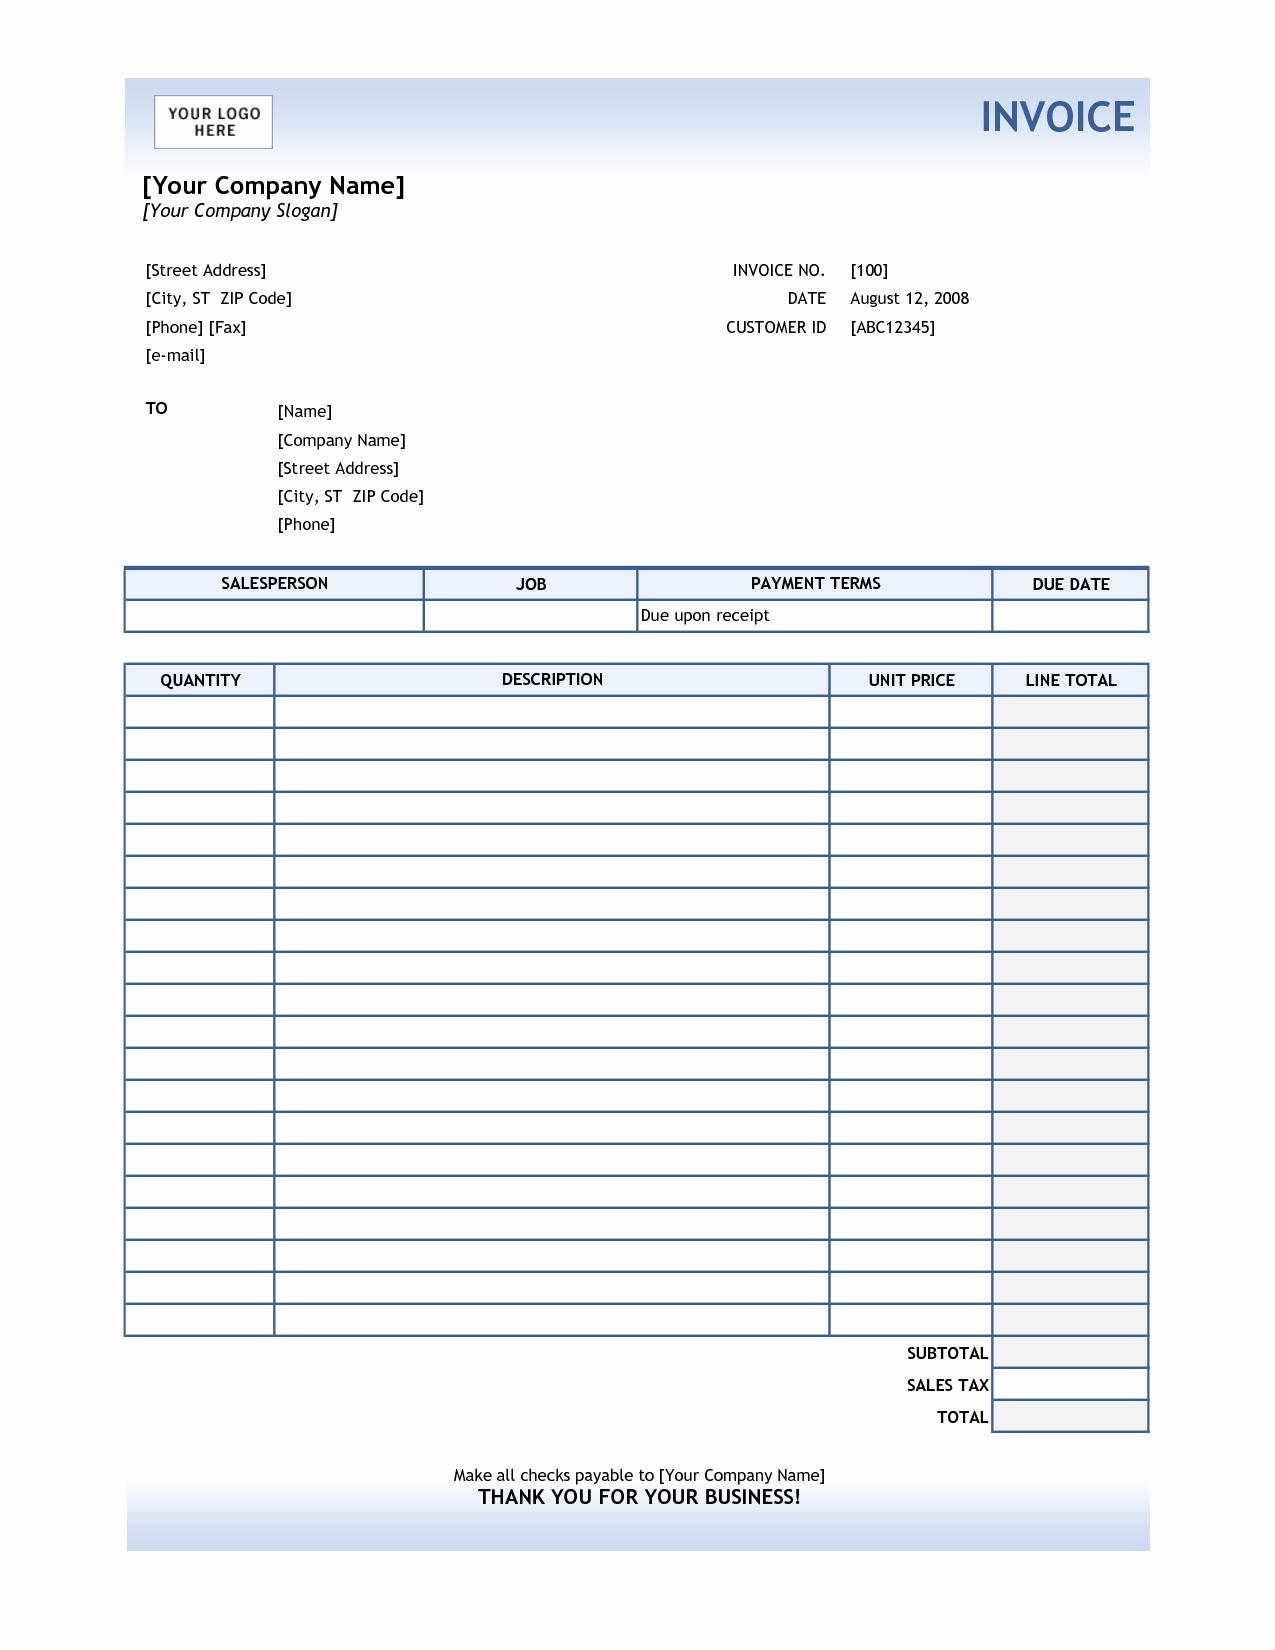 Simple Invoice Template Excel Beautiful Service Invoice Template Excel